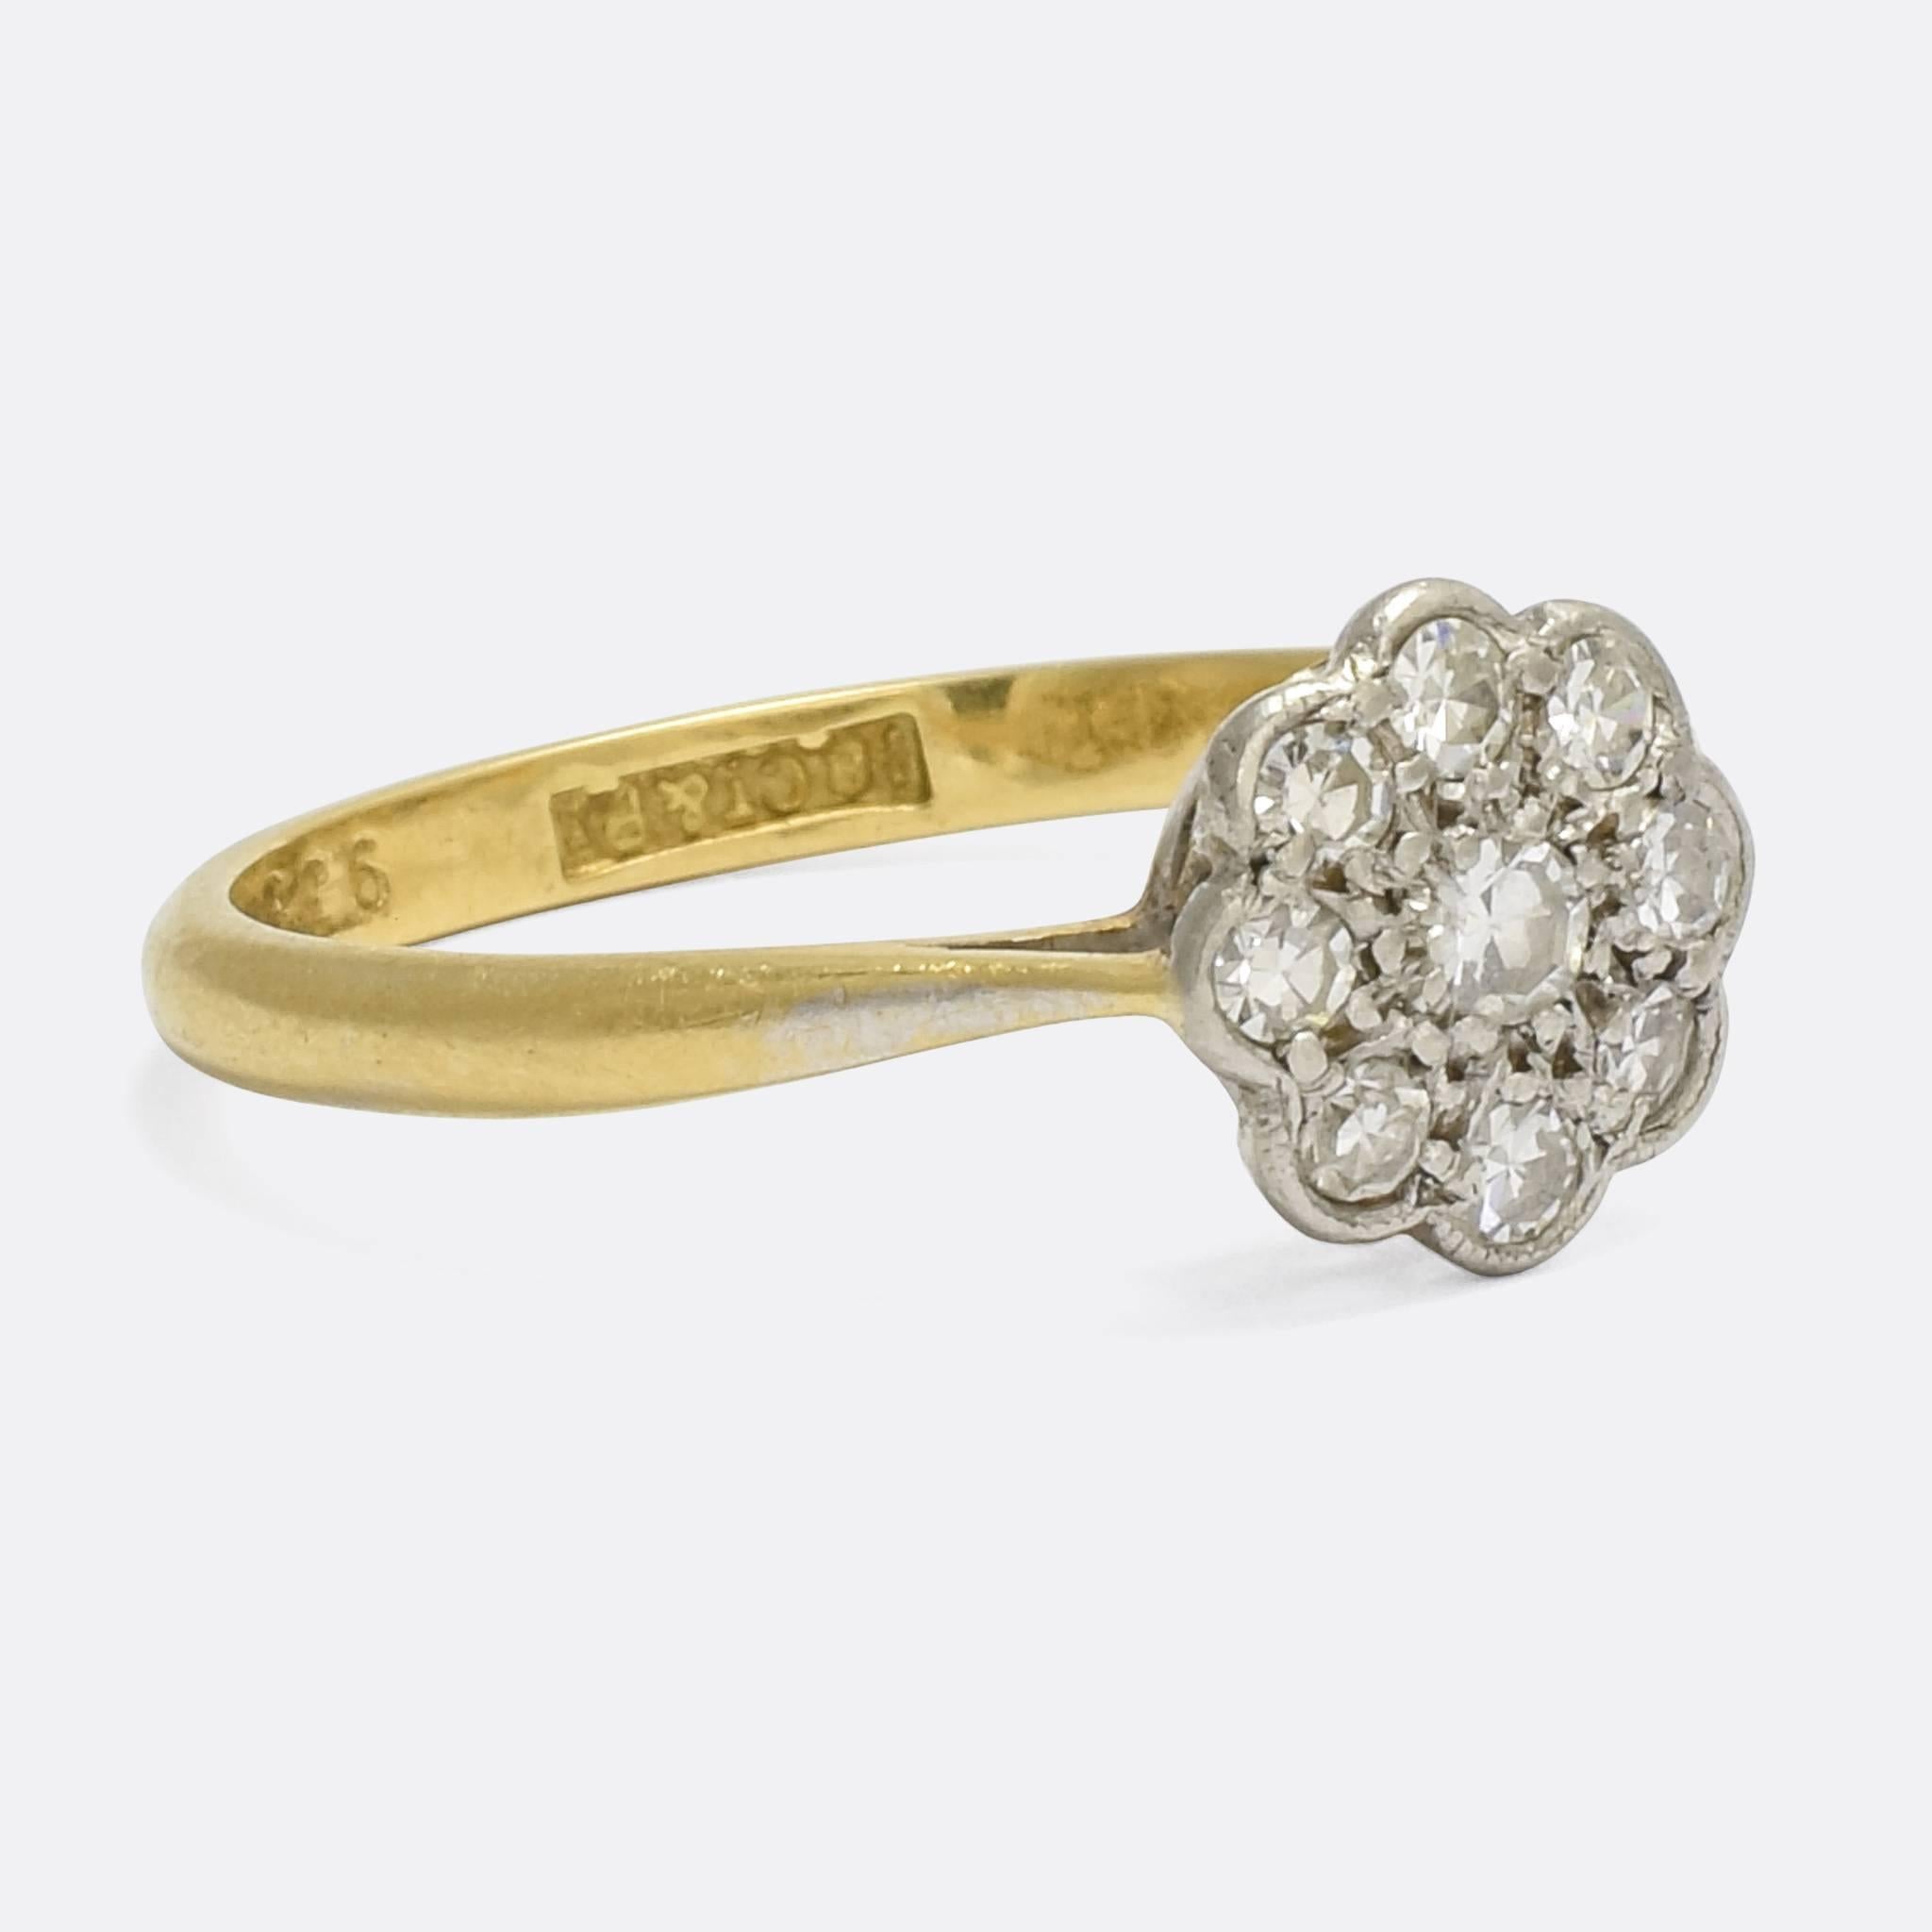 A pretty antique diamond cluster ring, the head modelled as a daisy. It dates to the early 20th Century, modelled in platinum and 18k yellow gold with a pierced gallery that allows light in behind the stones. The platinum settings are finished in a